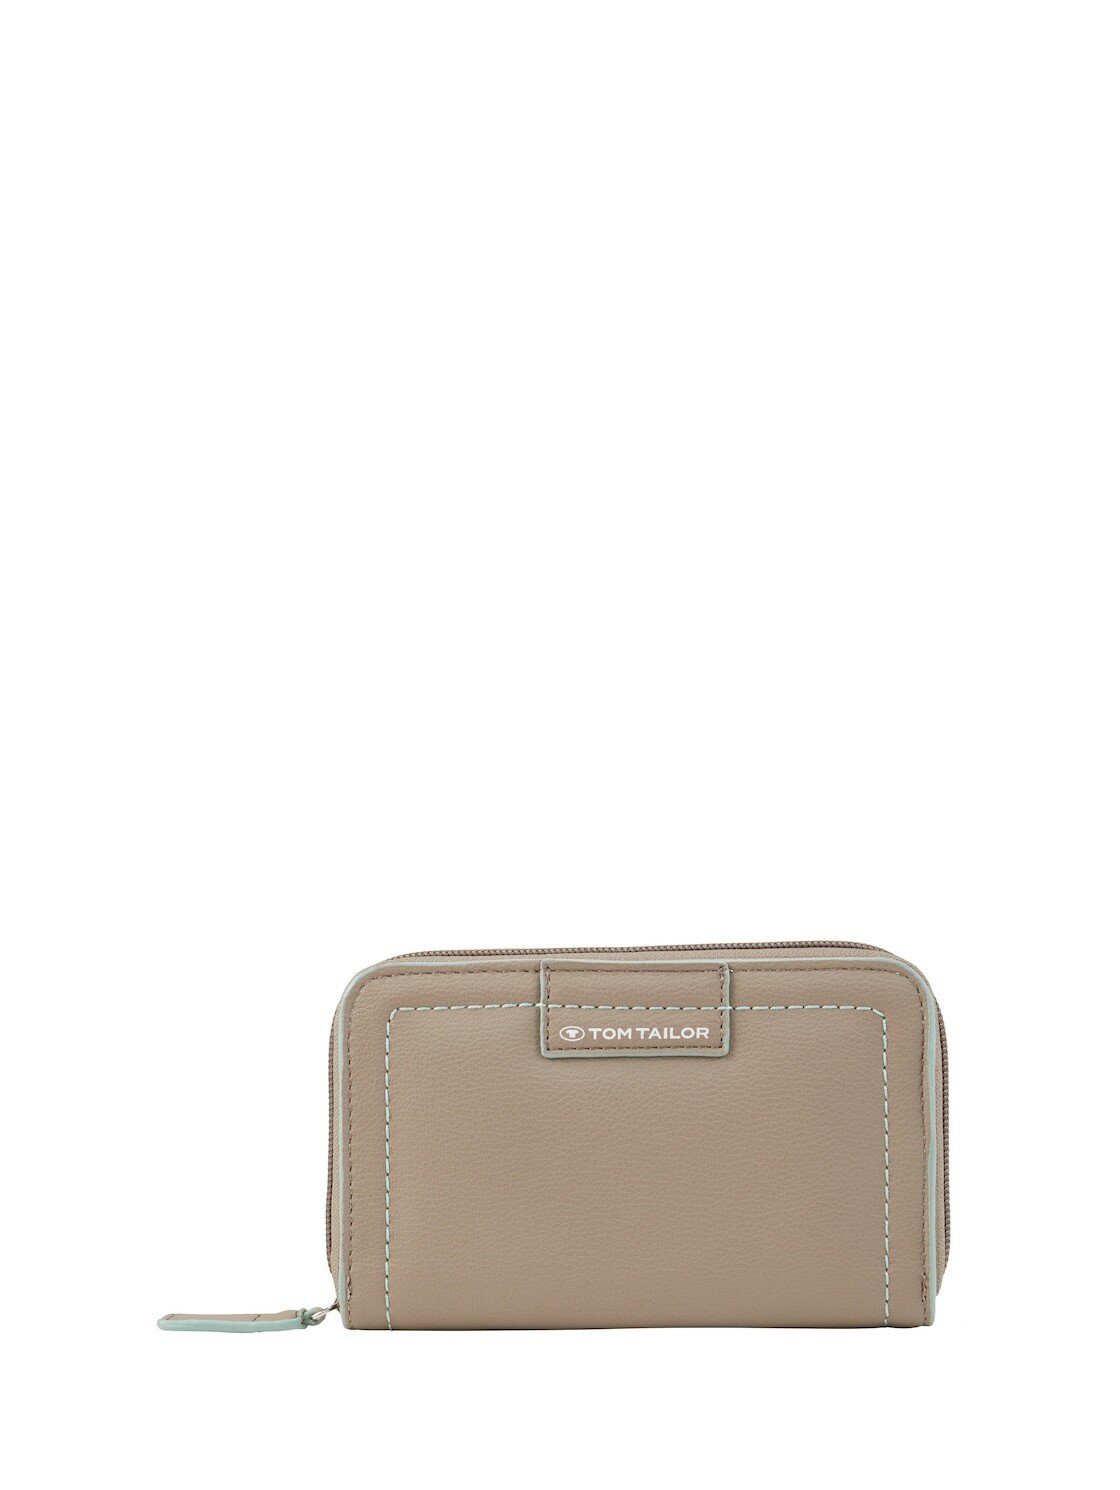 TOM TAILOR Clutch Miri Mare Portemonnaie mixed taupe